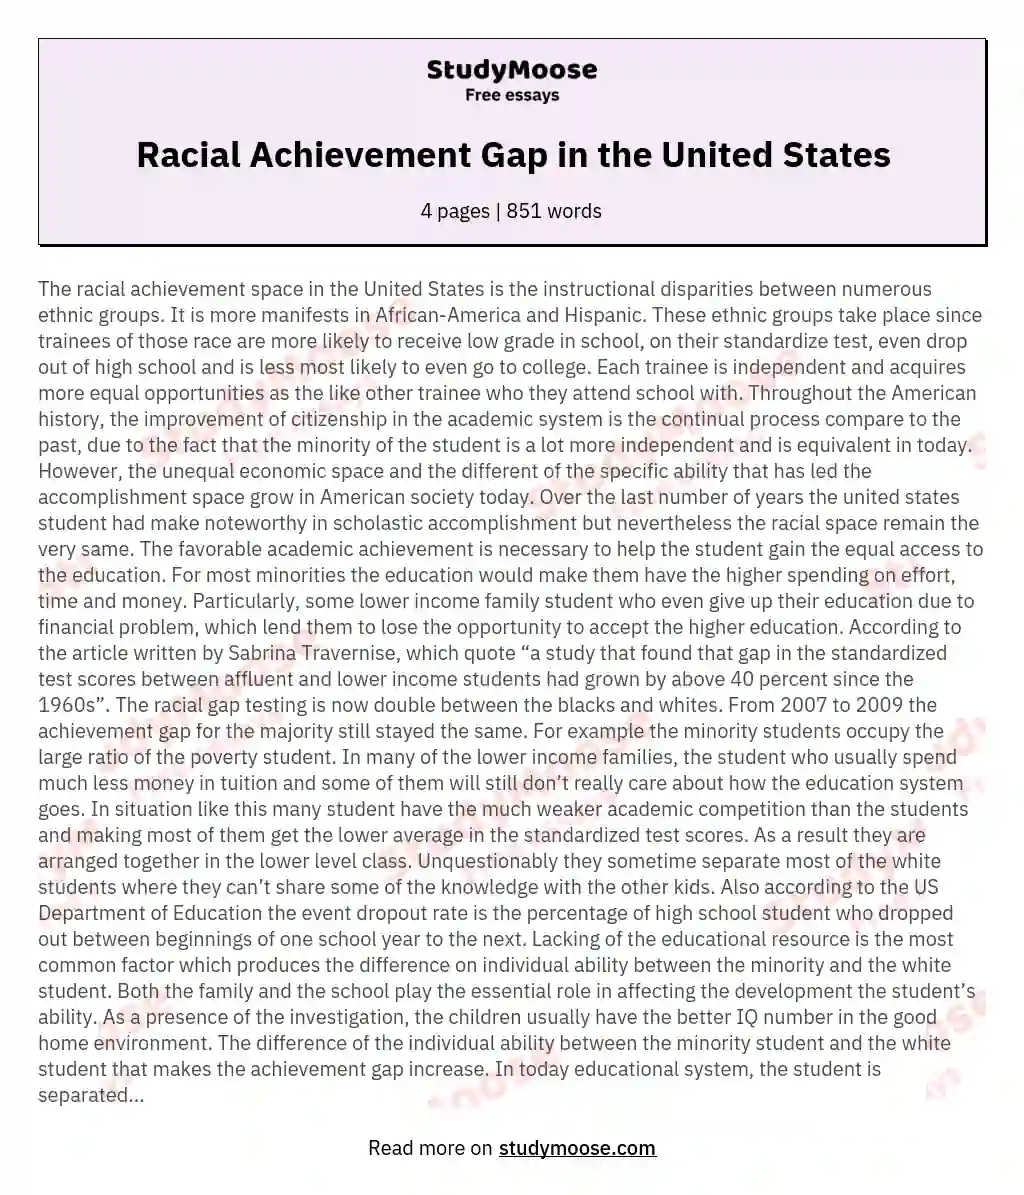 Racial Achievement Gap in the United States